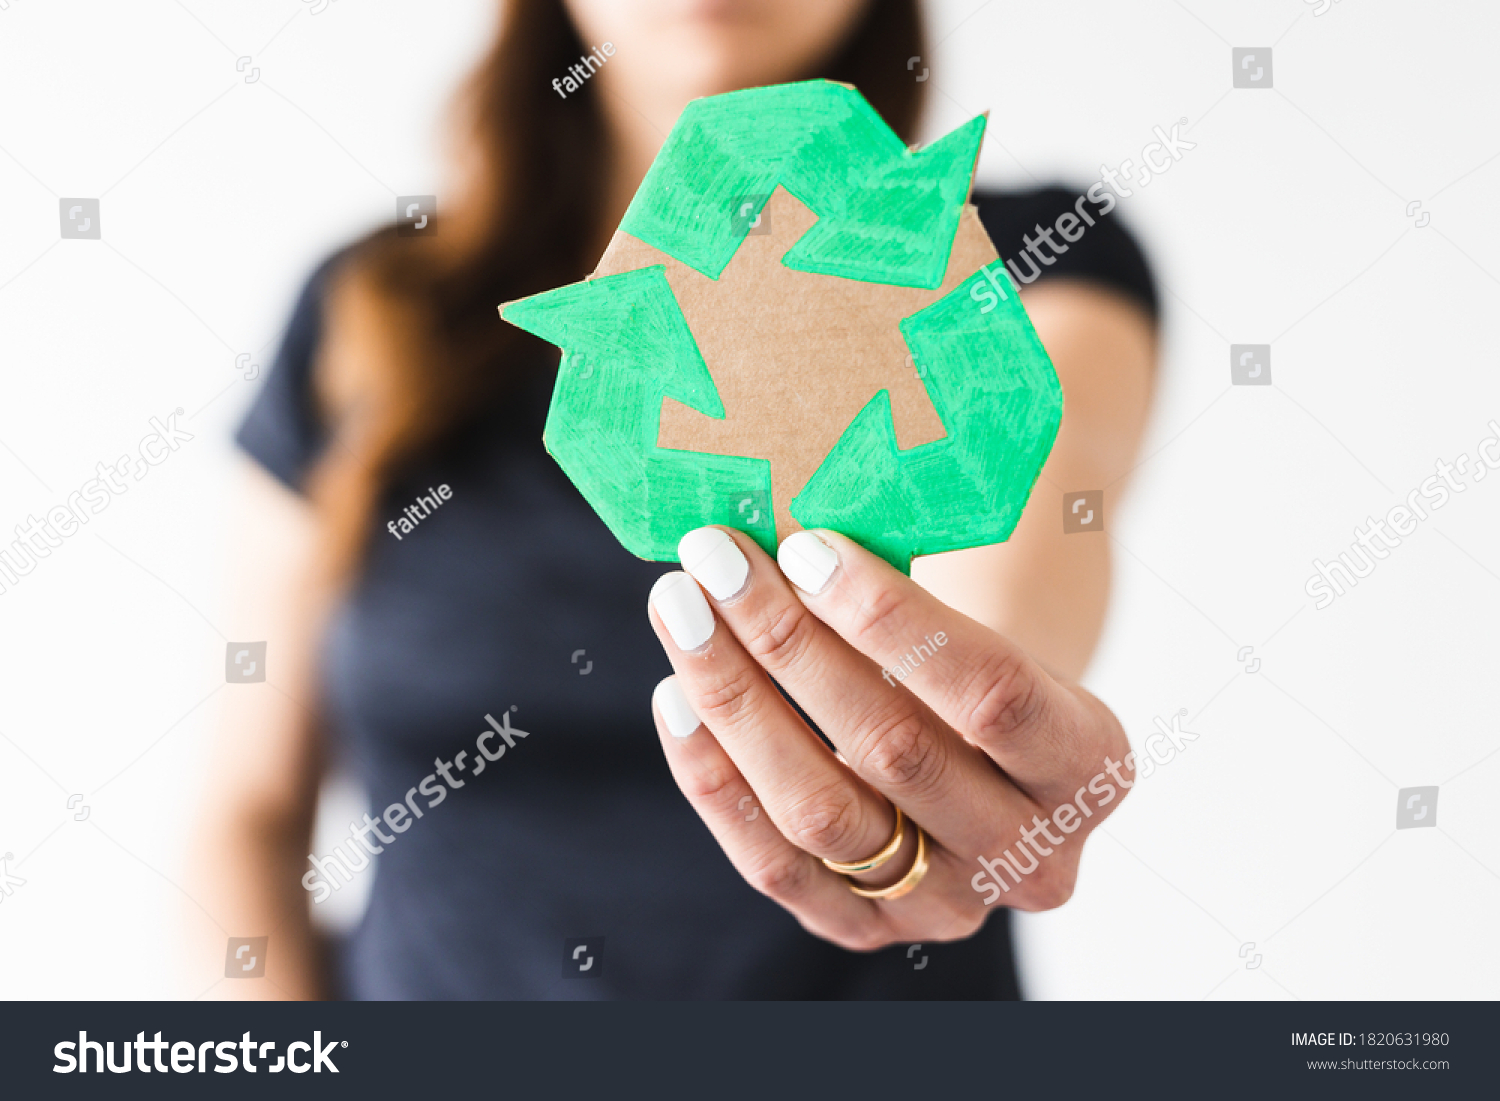 sustainable development concept, woman holding a recycle sign towards the camera shot at shallow depth of field #1820631980